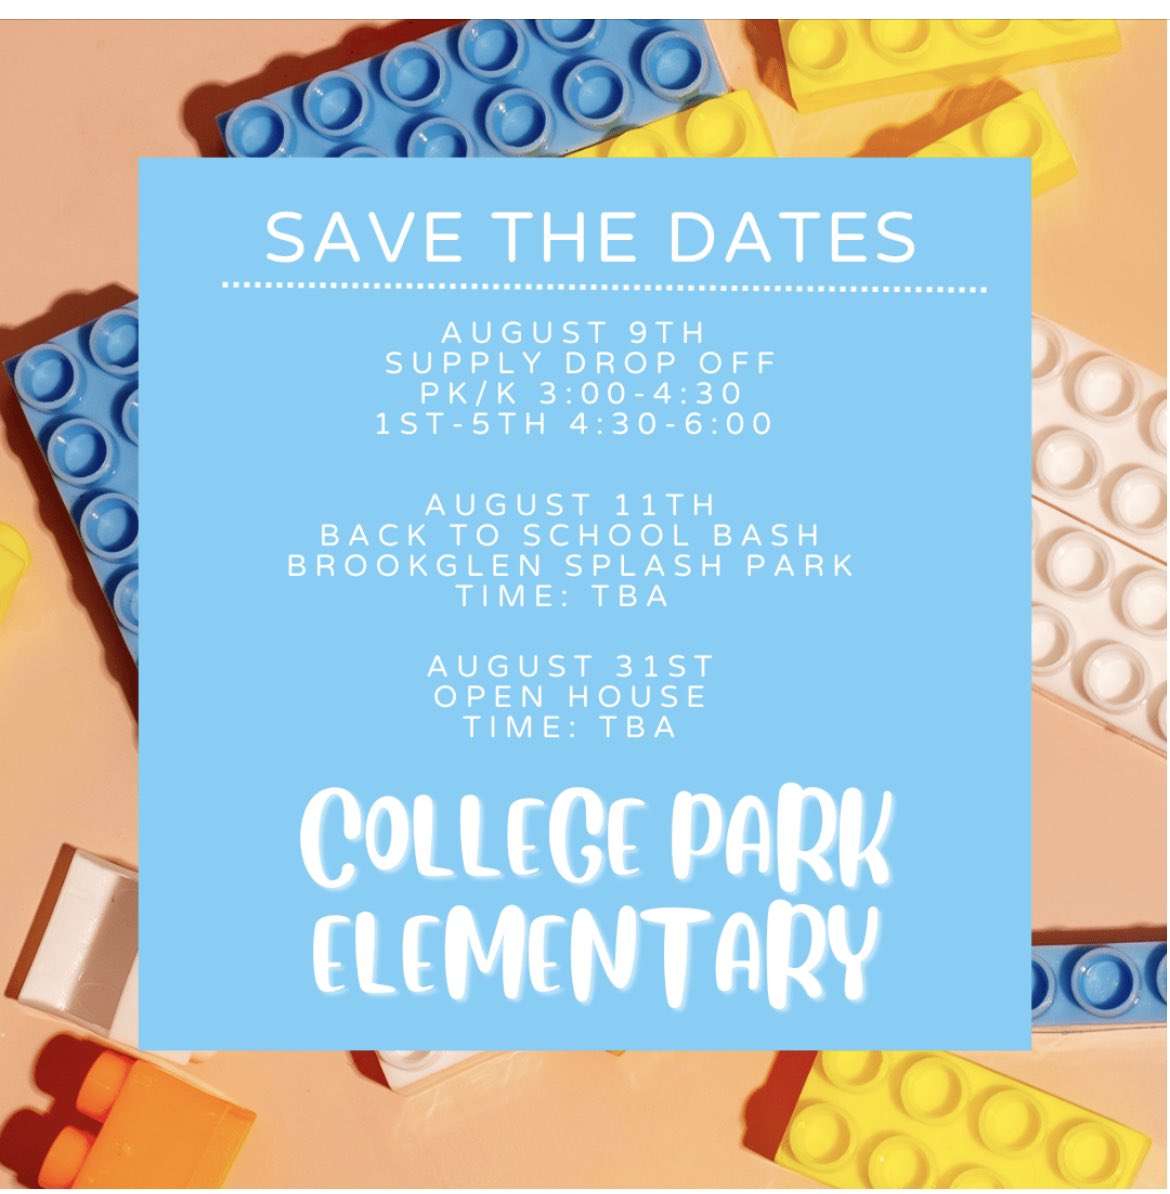 Save the Dates College Park Family! Don’t forget our first day of school is August 15th and we cannot wait to see everyone at our first event of the year! @lpisd #Buildingalegacy #IAMCPE #IAMLP